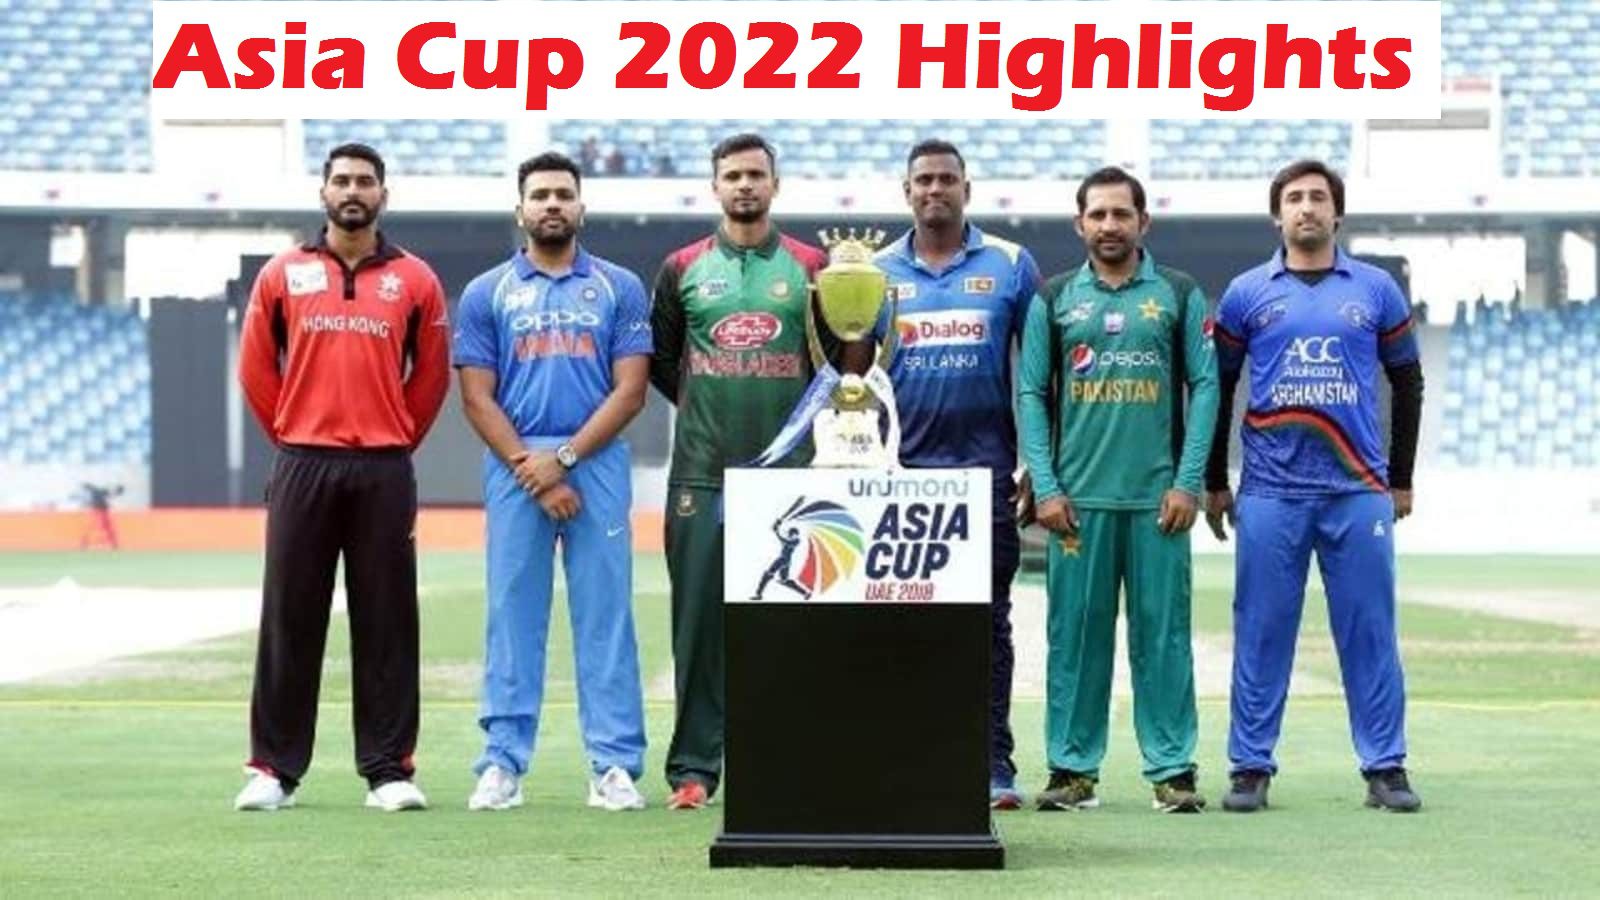 Asia Cup 2022 Highlights Top Batsman, Bowler, All Rounder